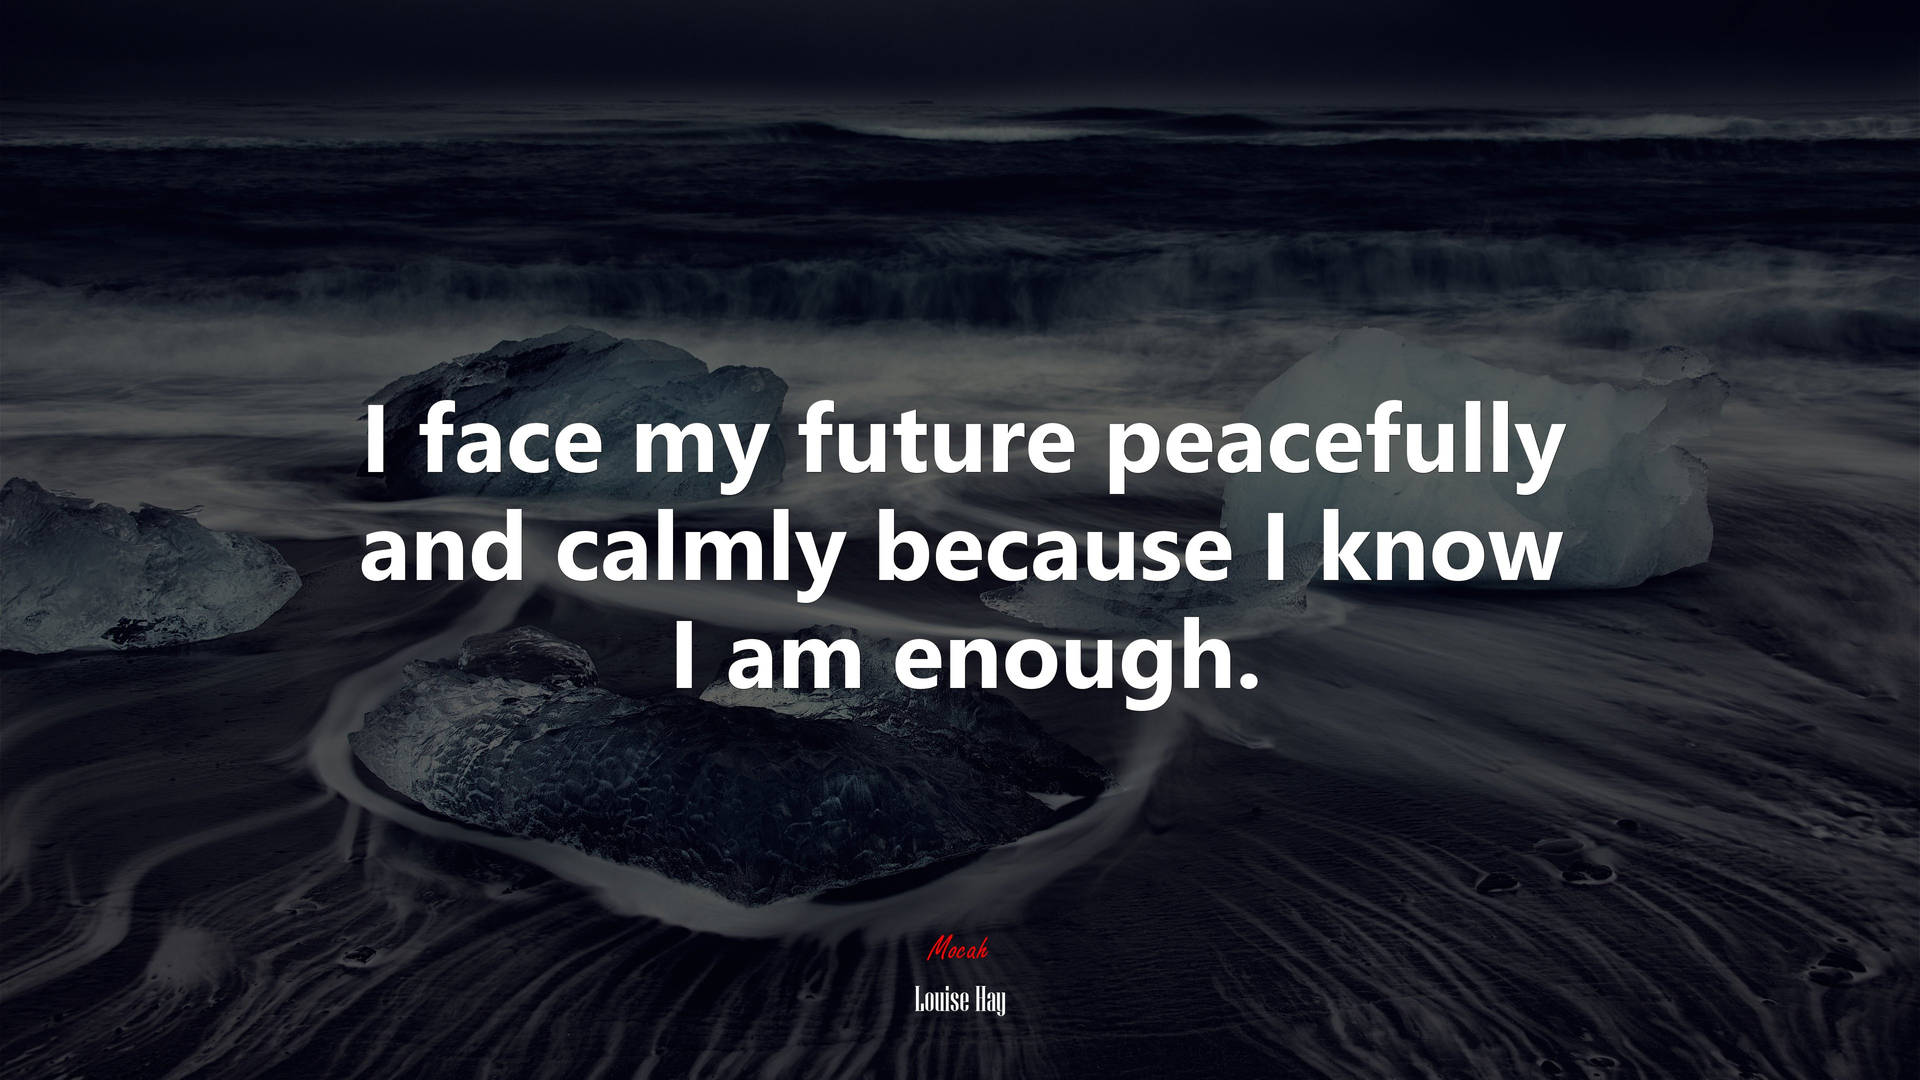 Face My Future Peacefully And Calmly Because I Know I Am Enough Wallpaper